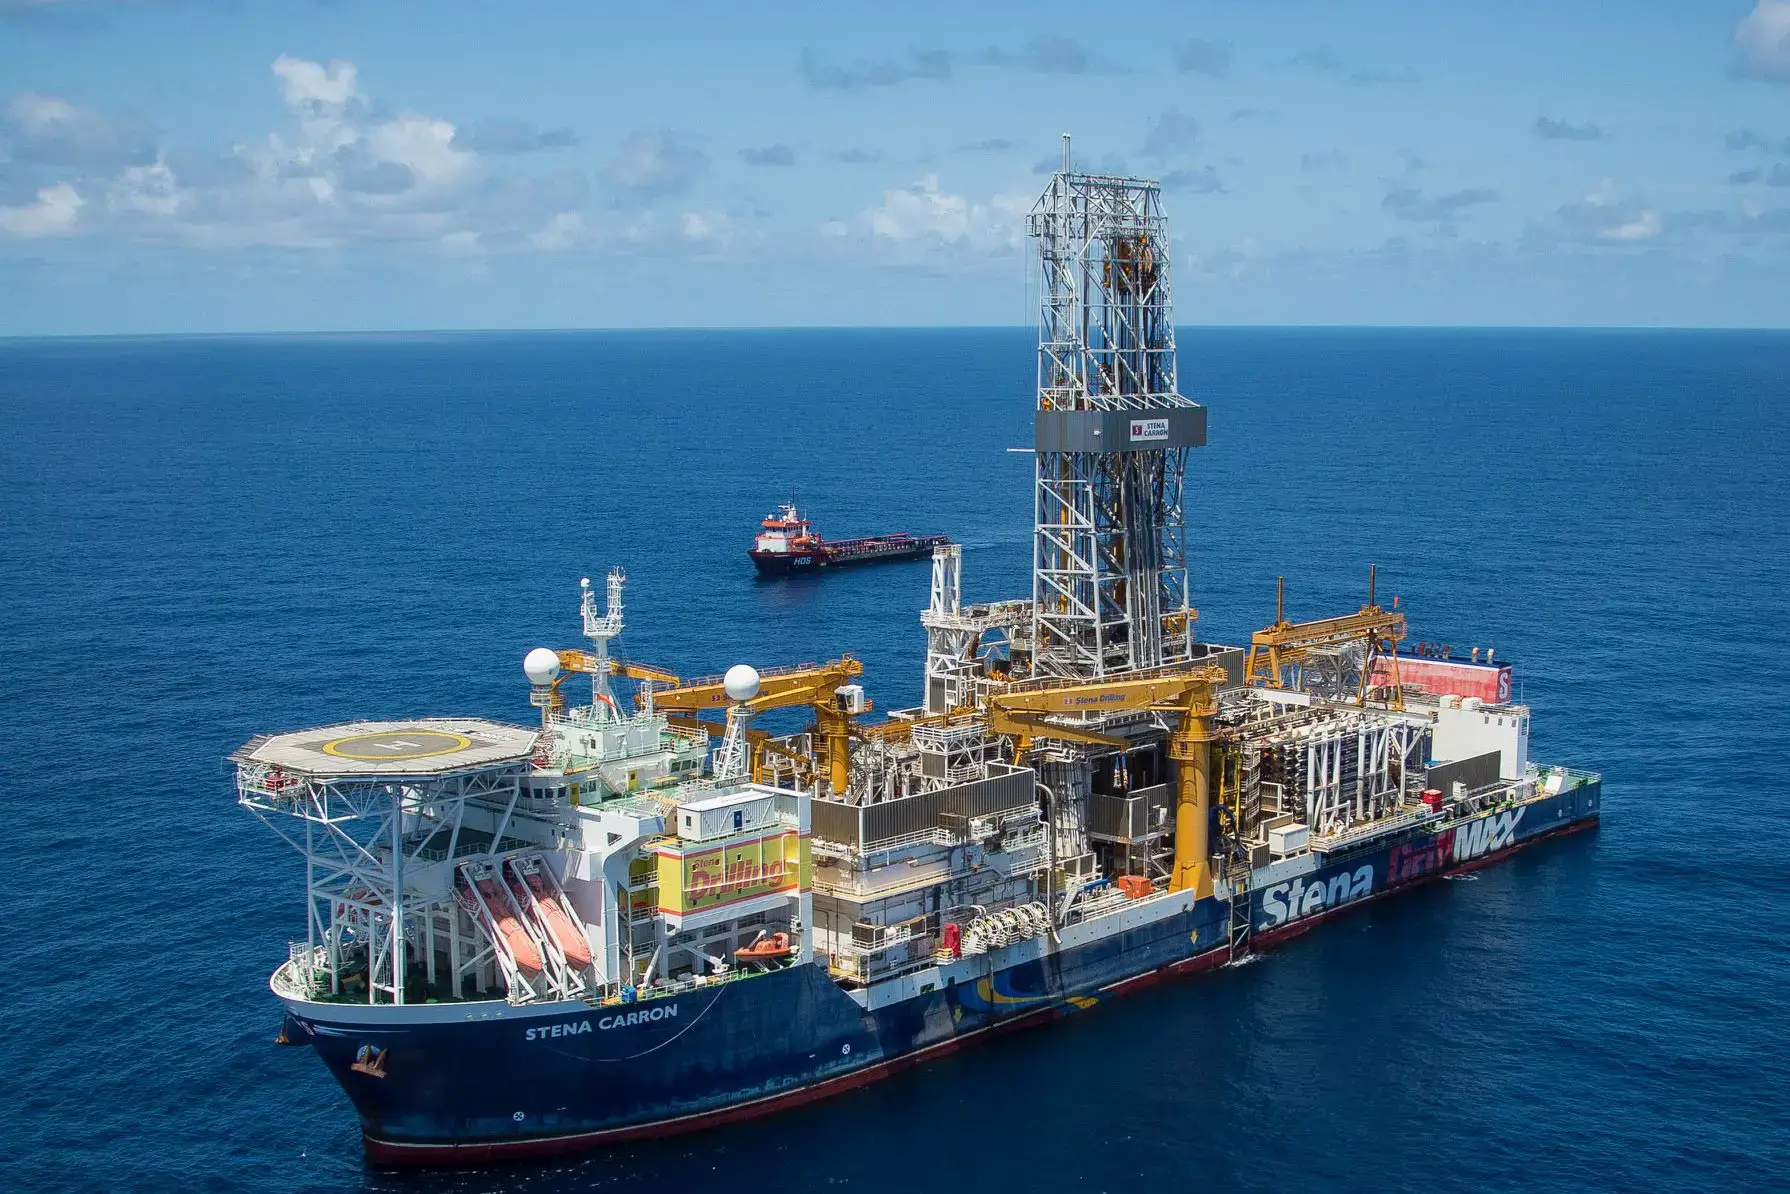 Expectations oil drilling surpassed in Guyana